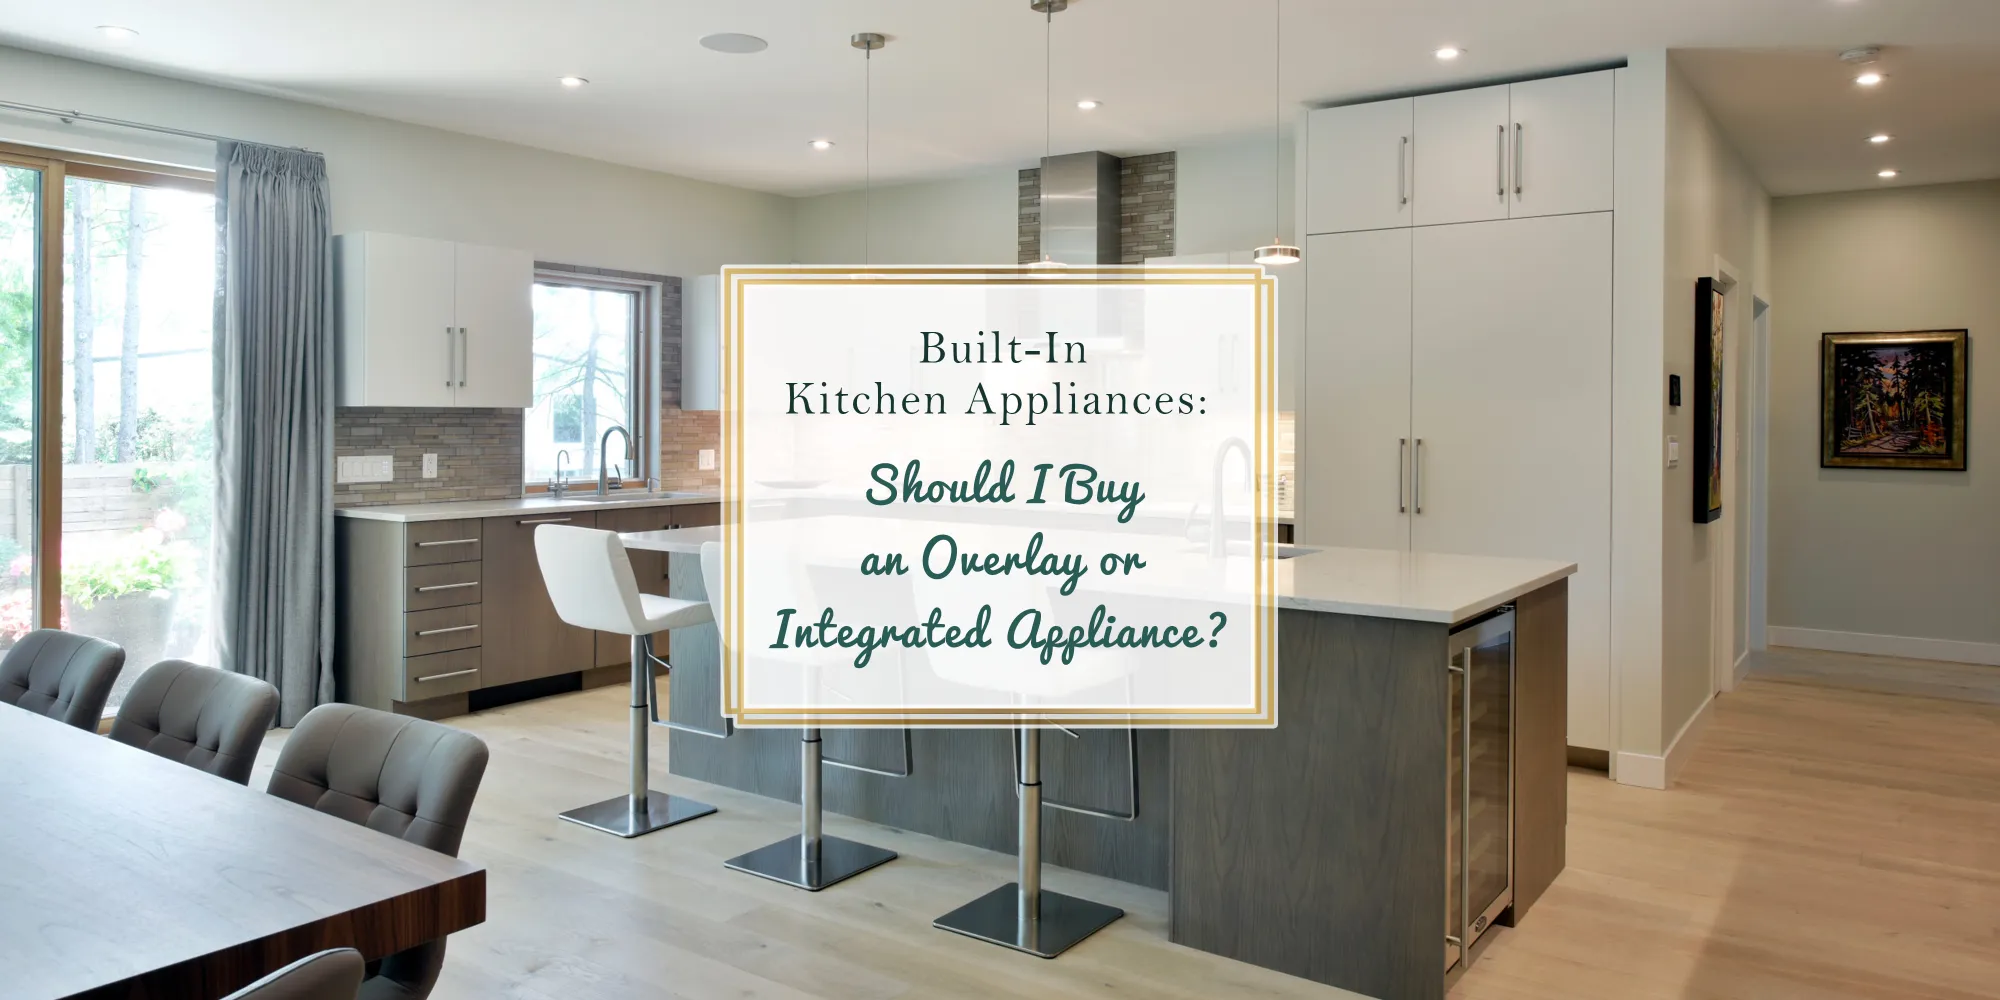 Overlay vs. Integrated: Choosing Built-In Kitchen Appliances